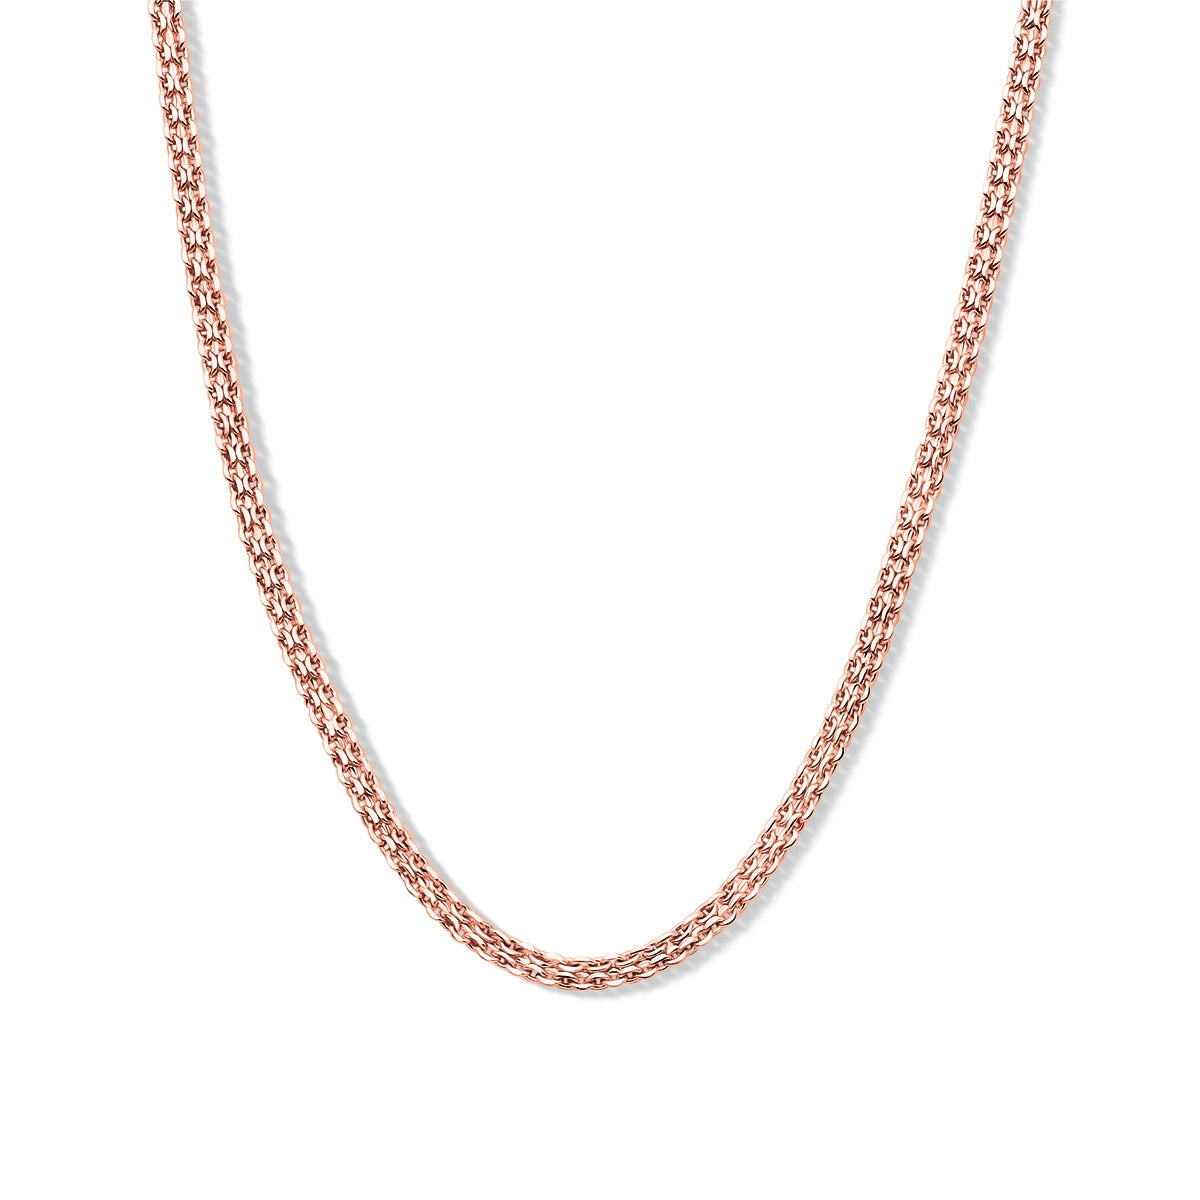 Simple rose gold chain necklace